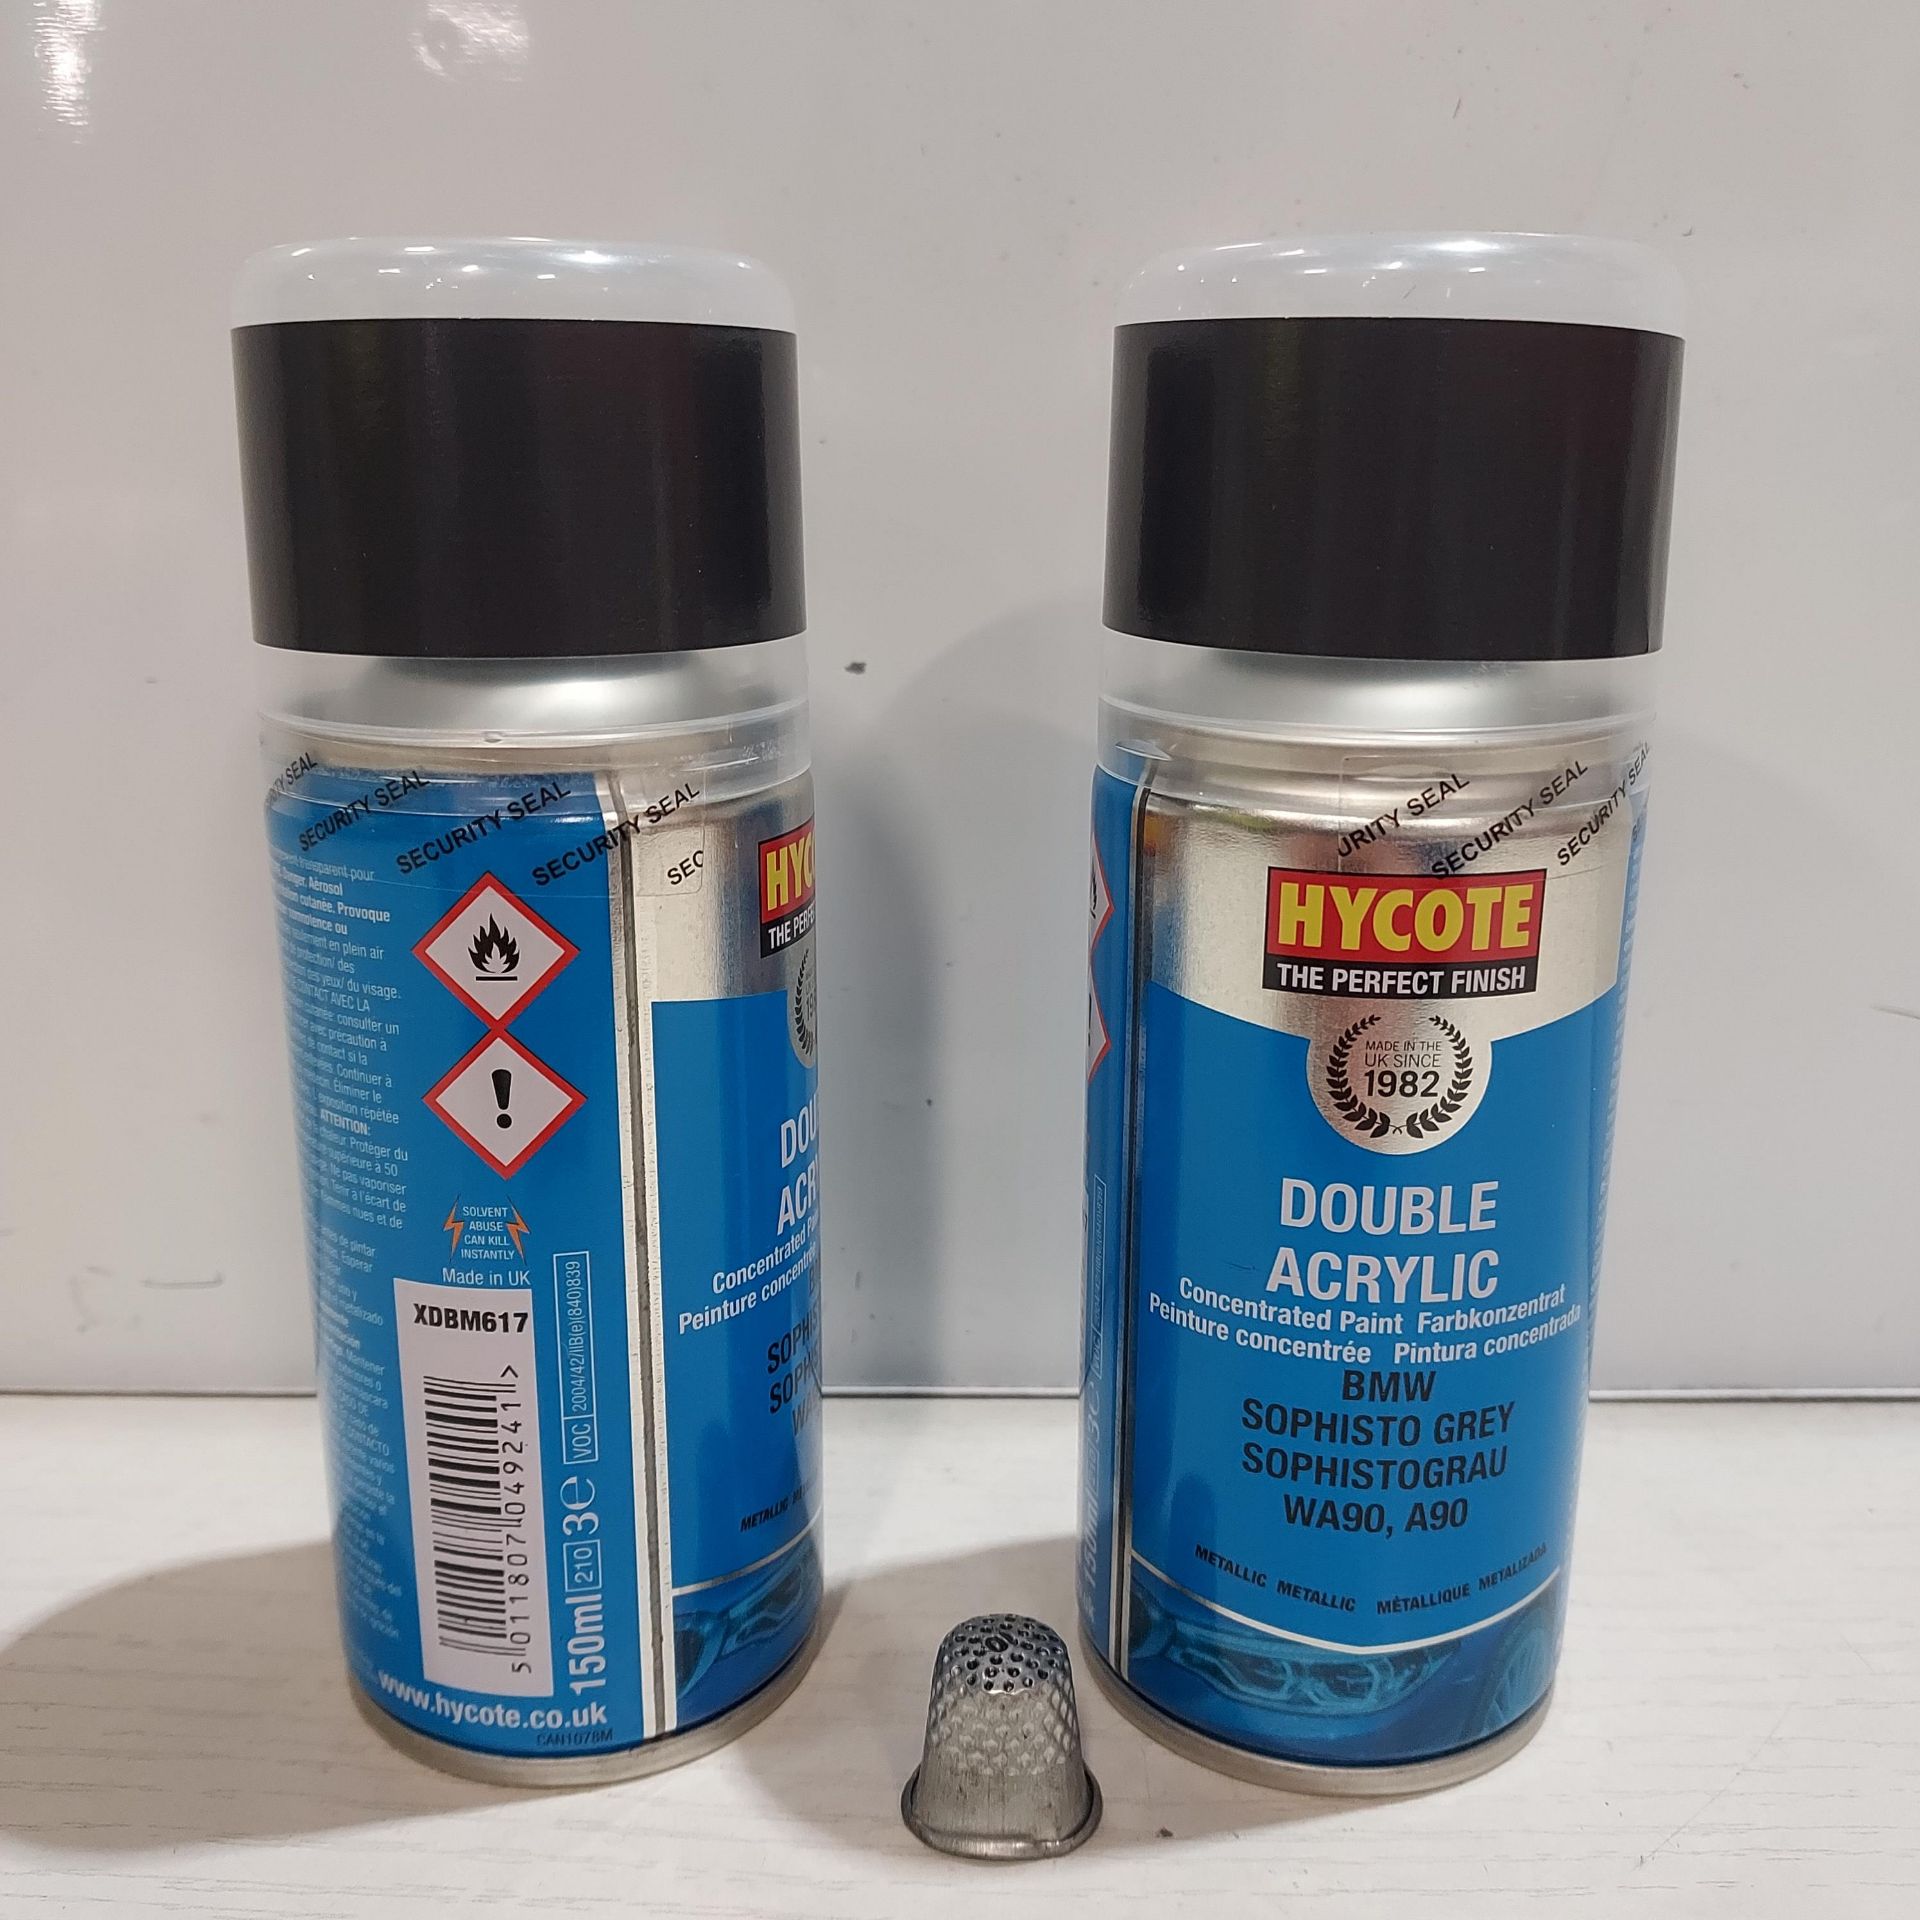 120 X BRAND NEW HYCOTE DOUBLE ACRYLIC CONCENTRATED PAINT IN BMW SOPHISTO GREY - 150ML